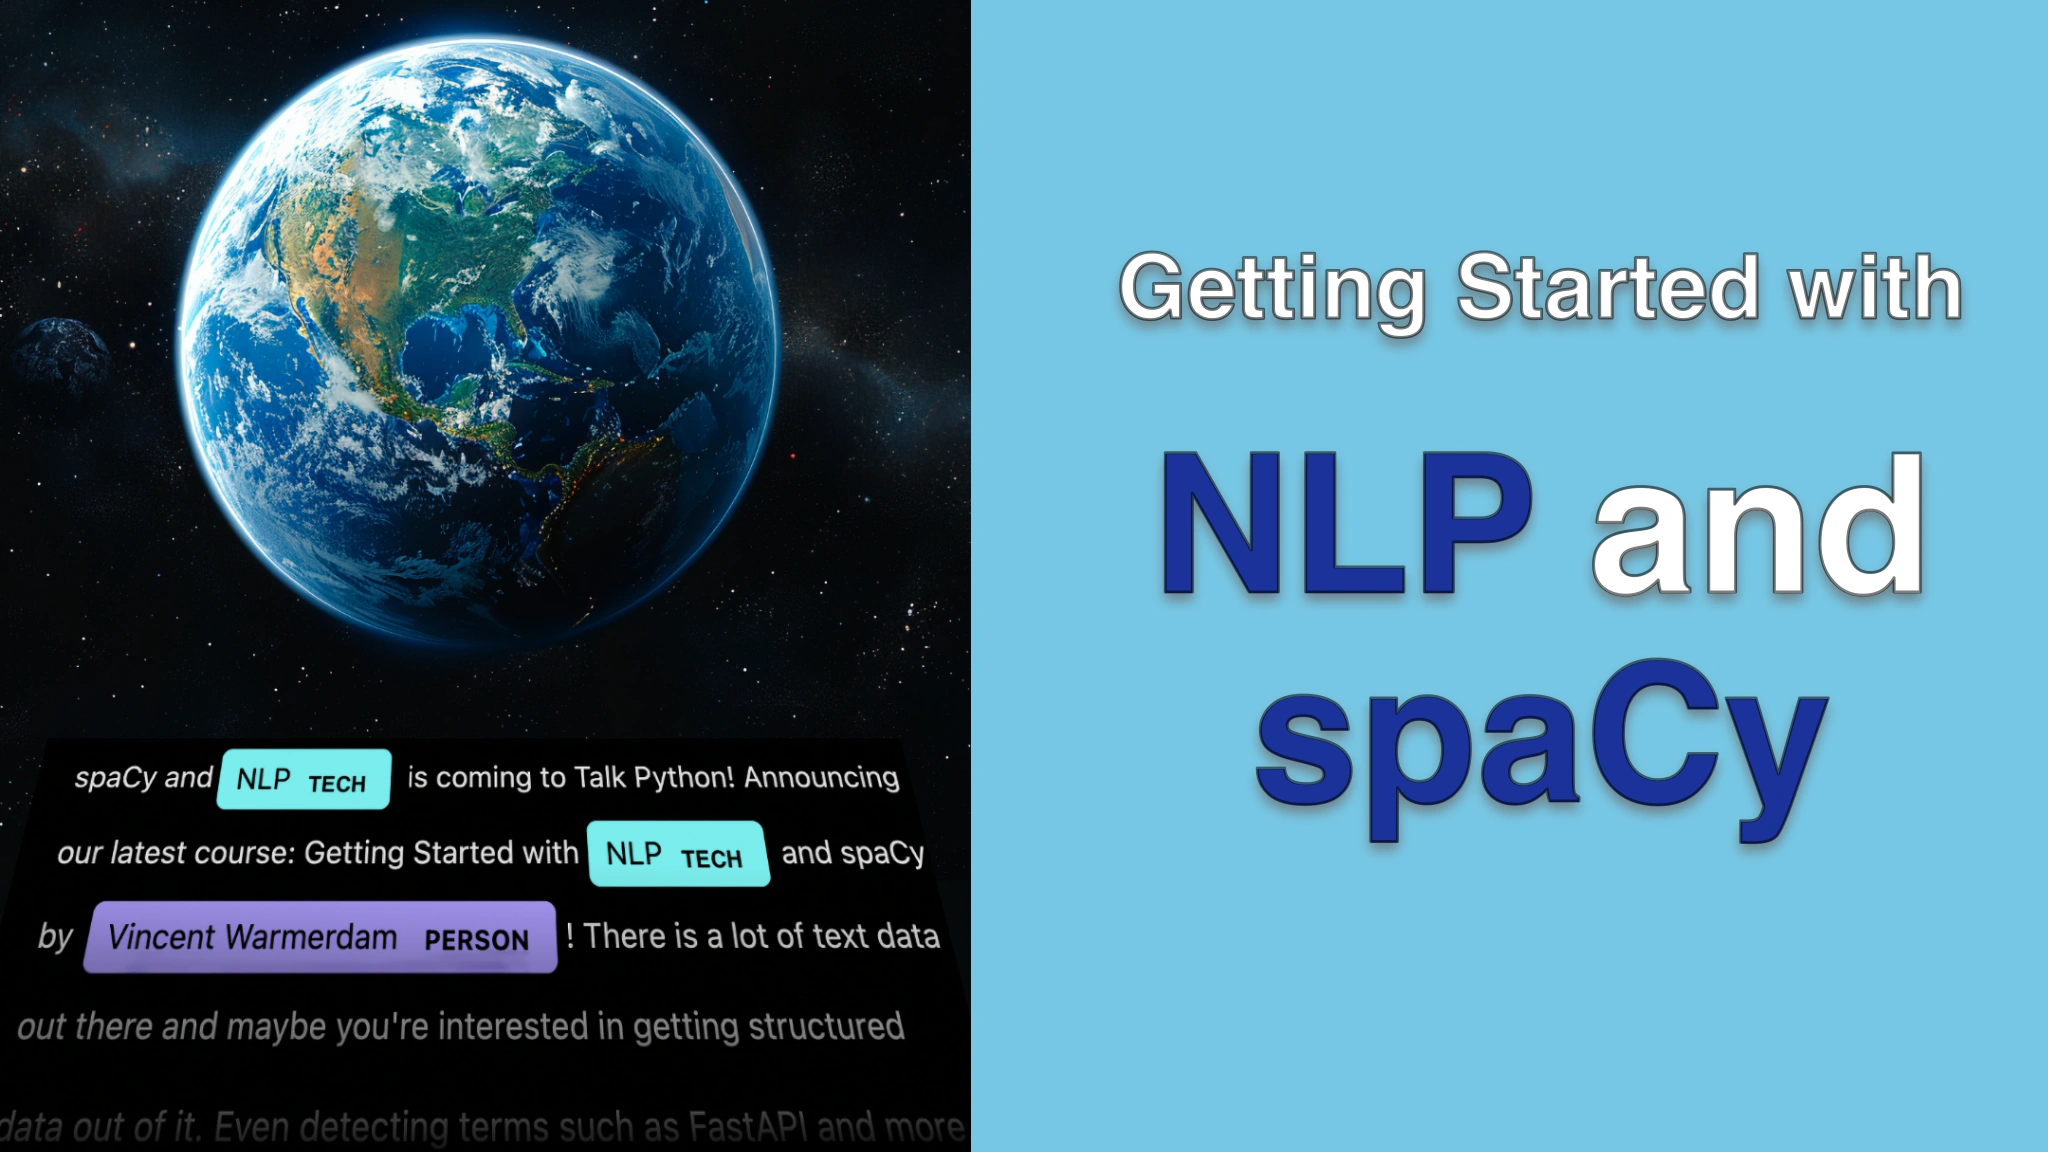 Course: Getting Started with NLP and spaCy